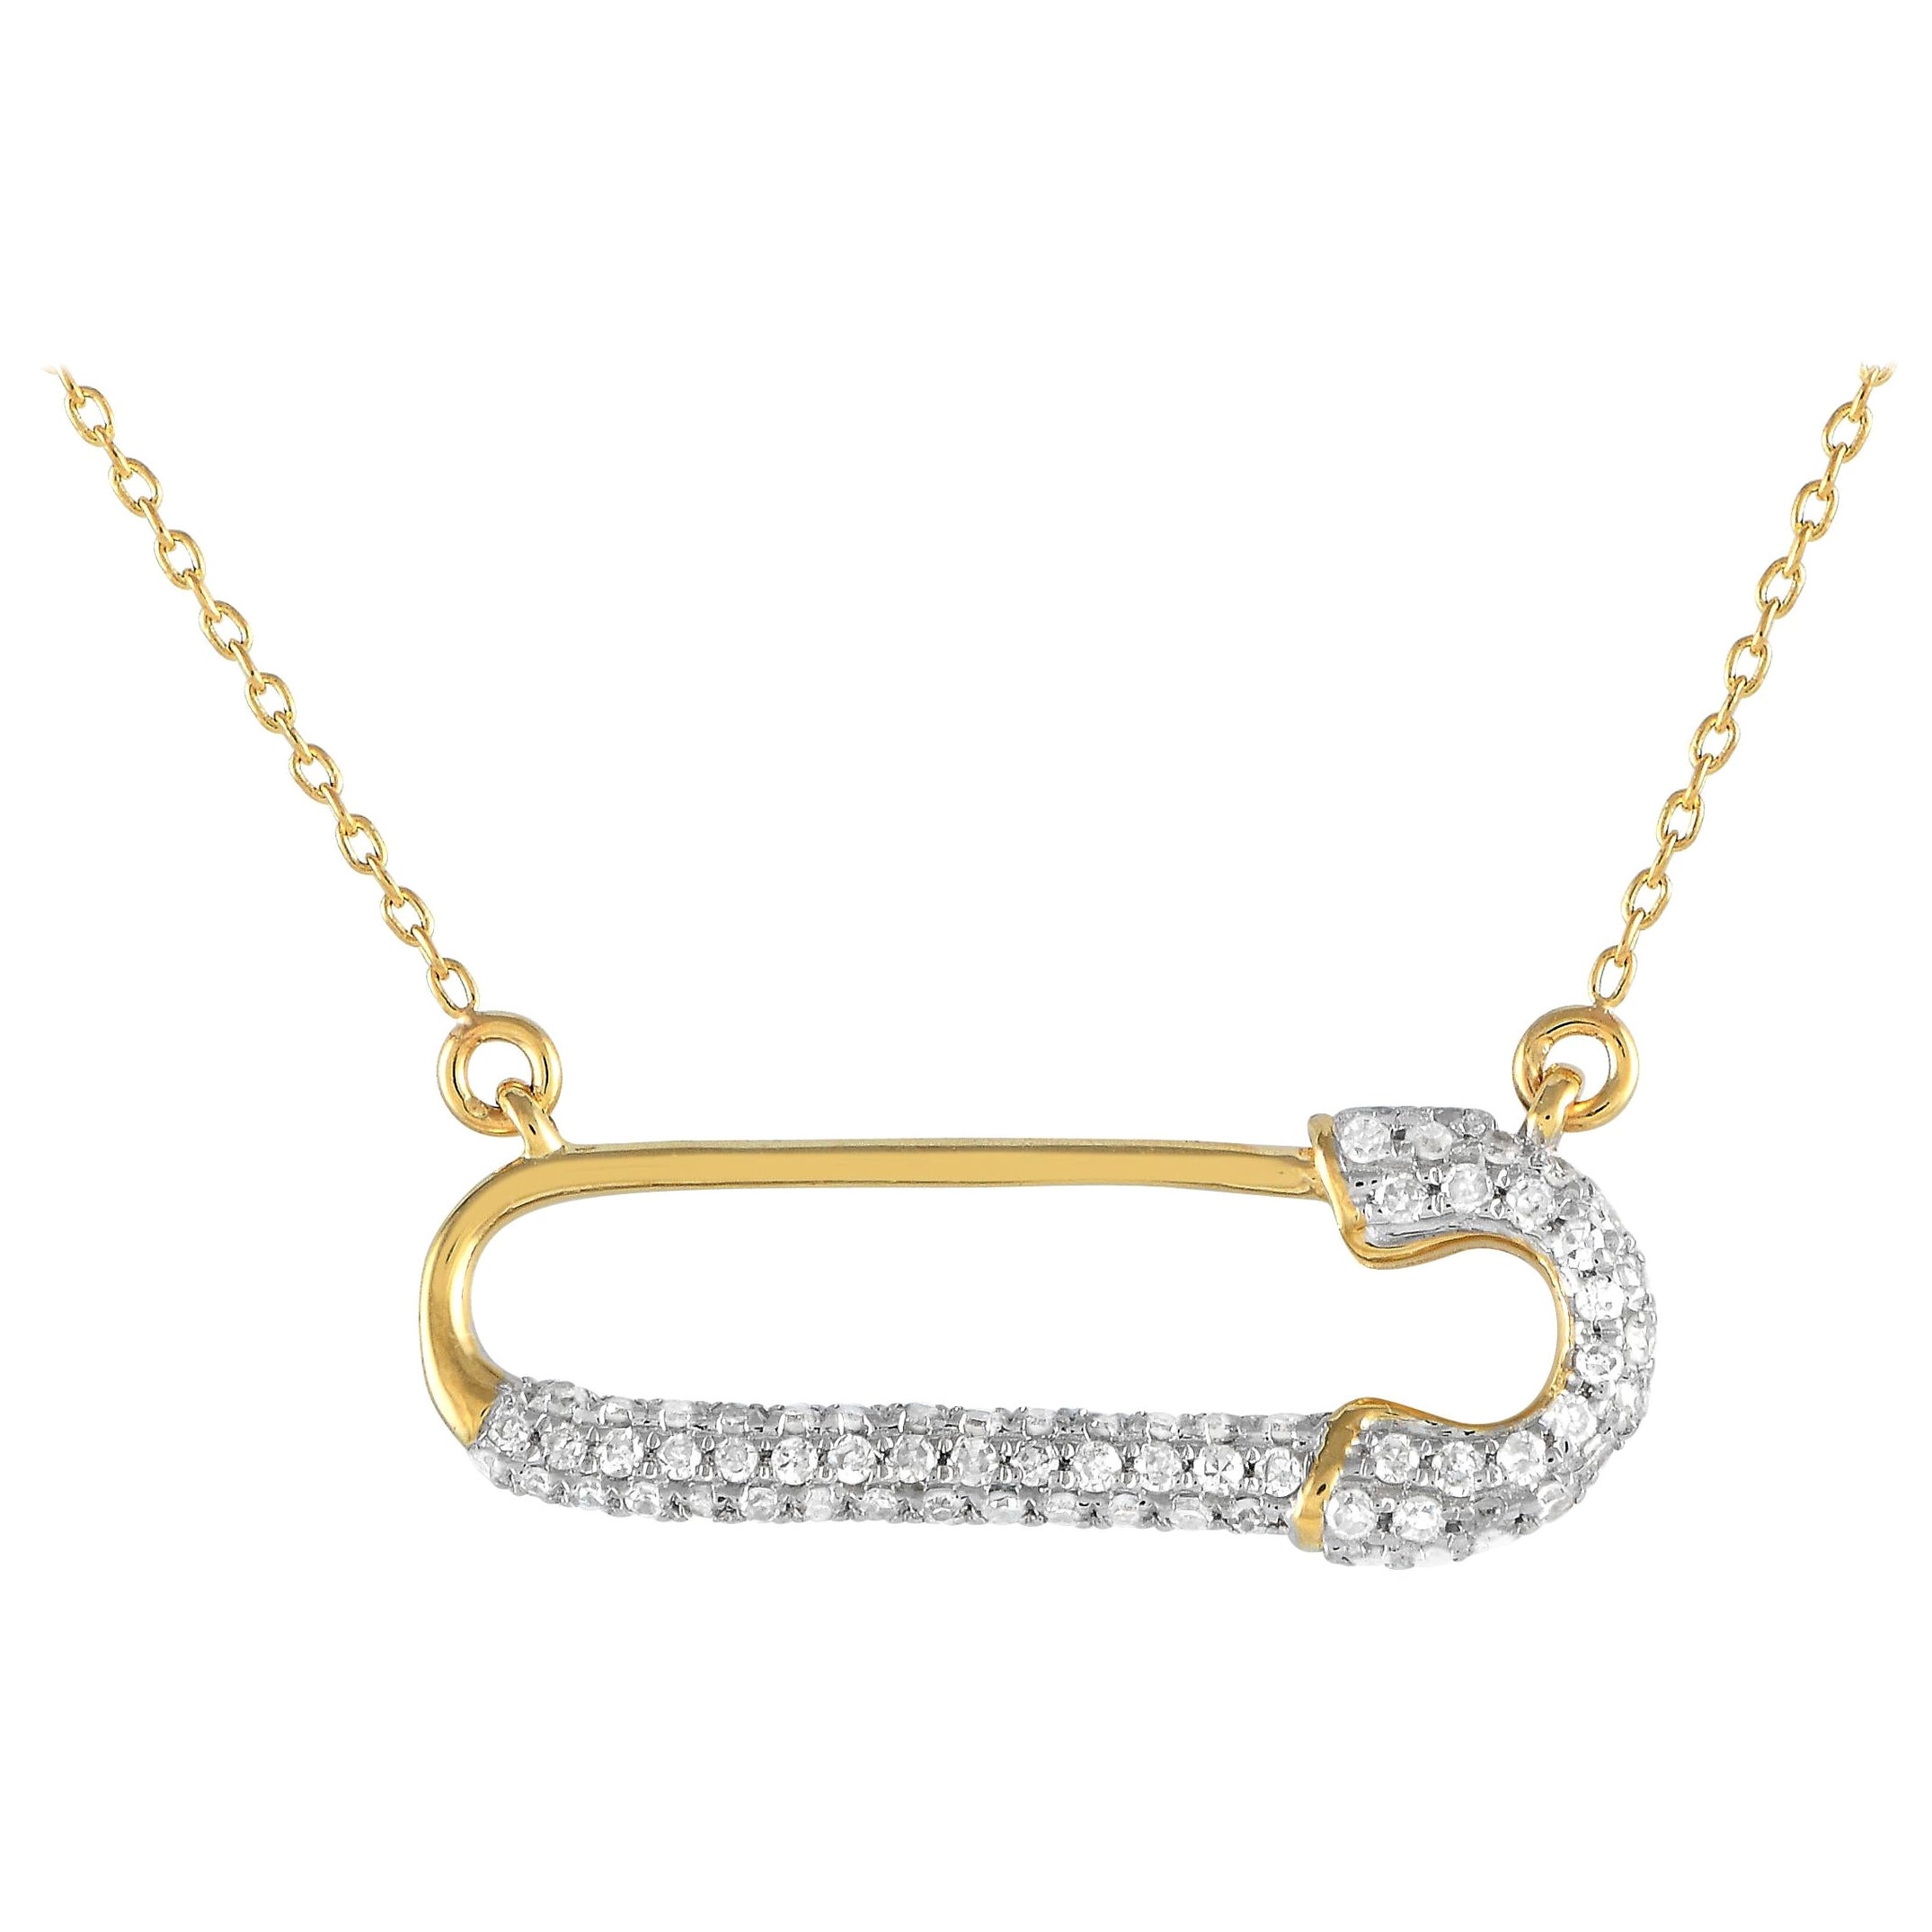 LB Exclusive 14K Yellow Gold 0.17ct Diamond Safety Pin Necklace NK4-14795Y For Sale